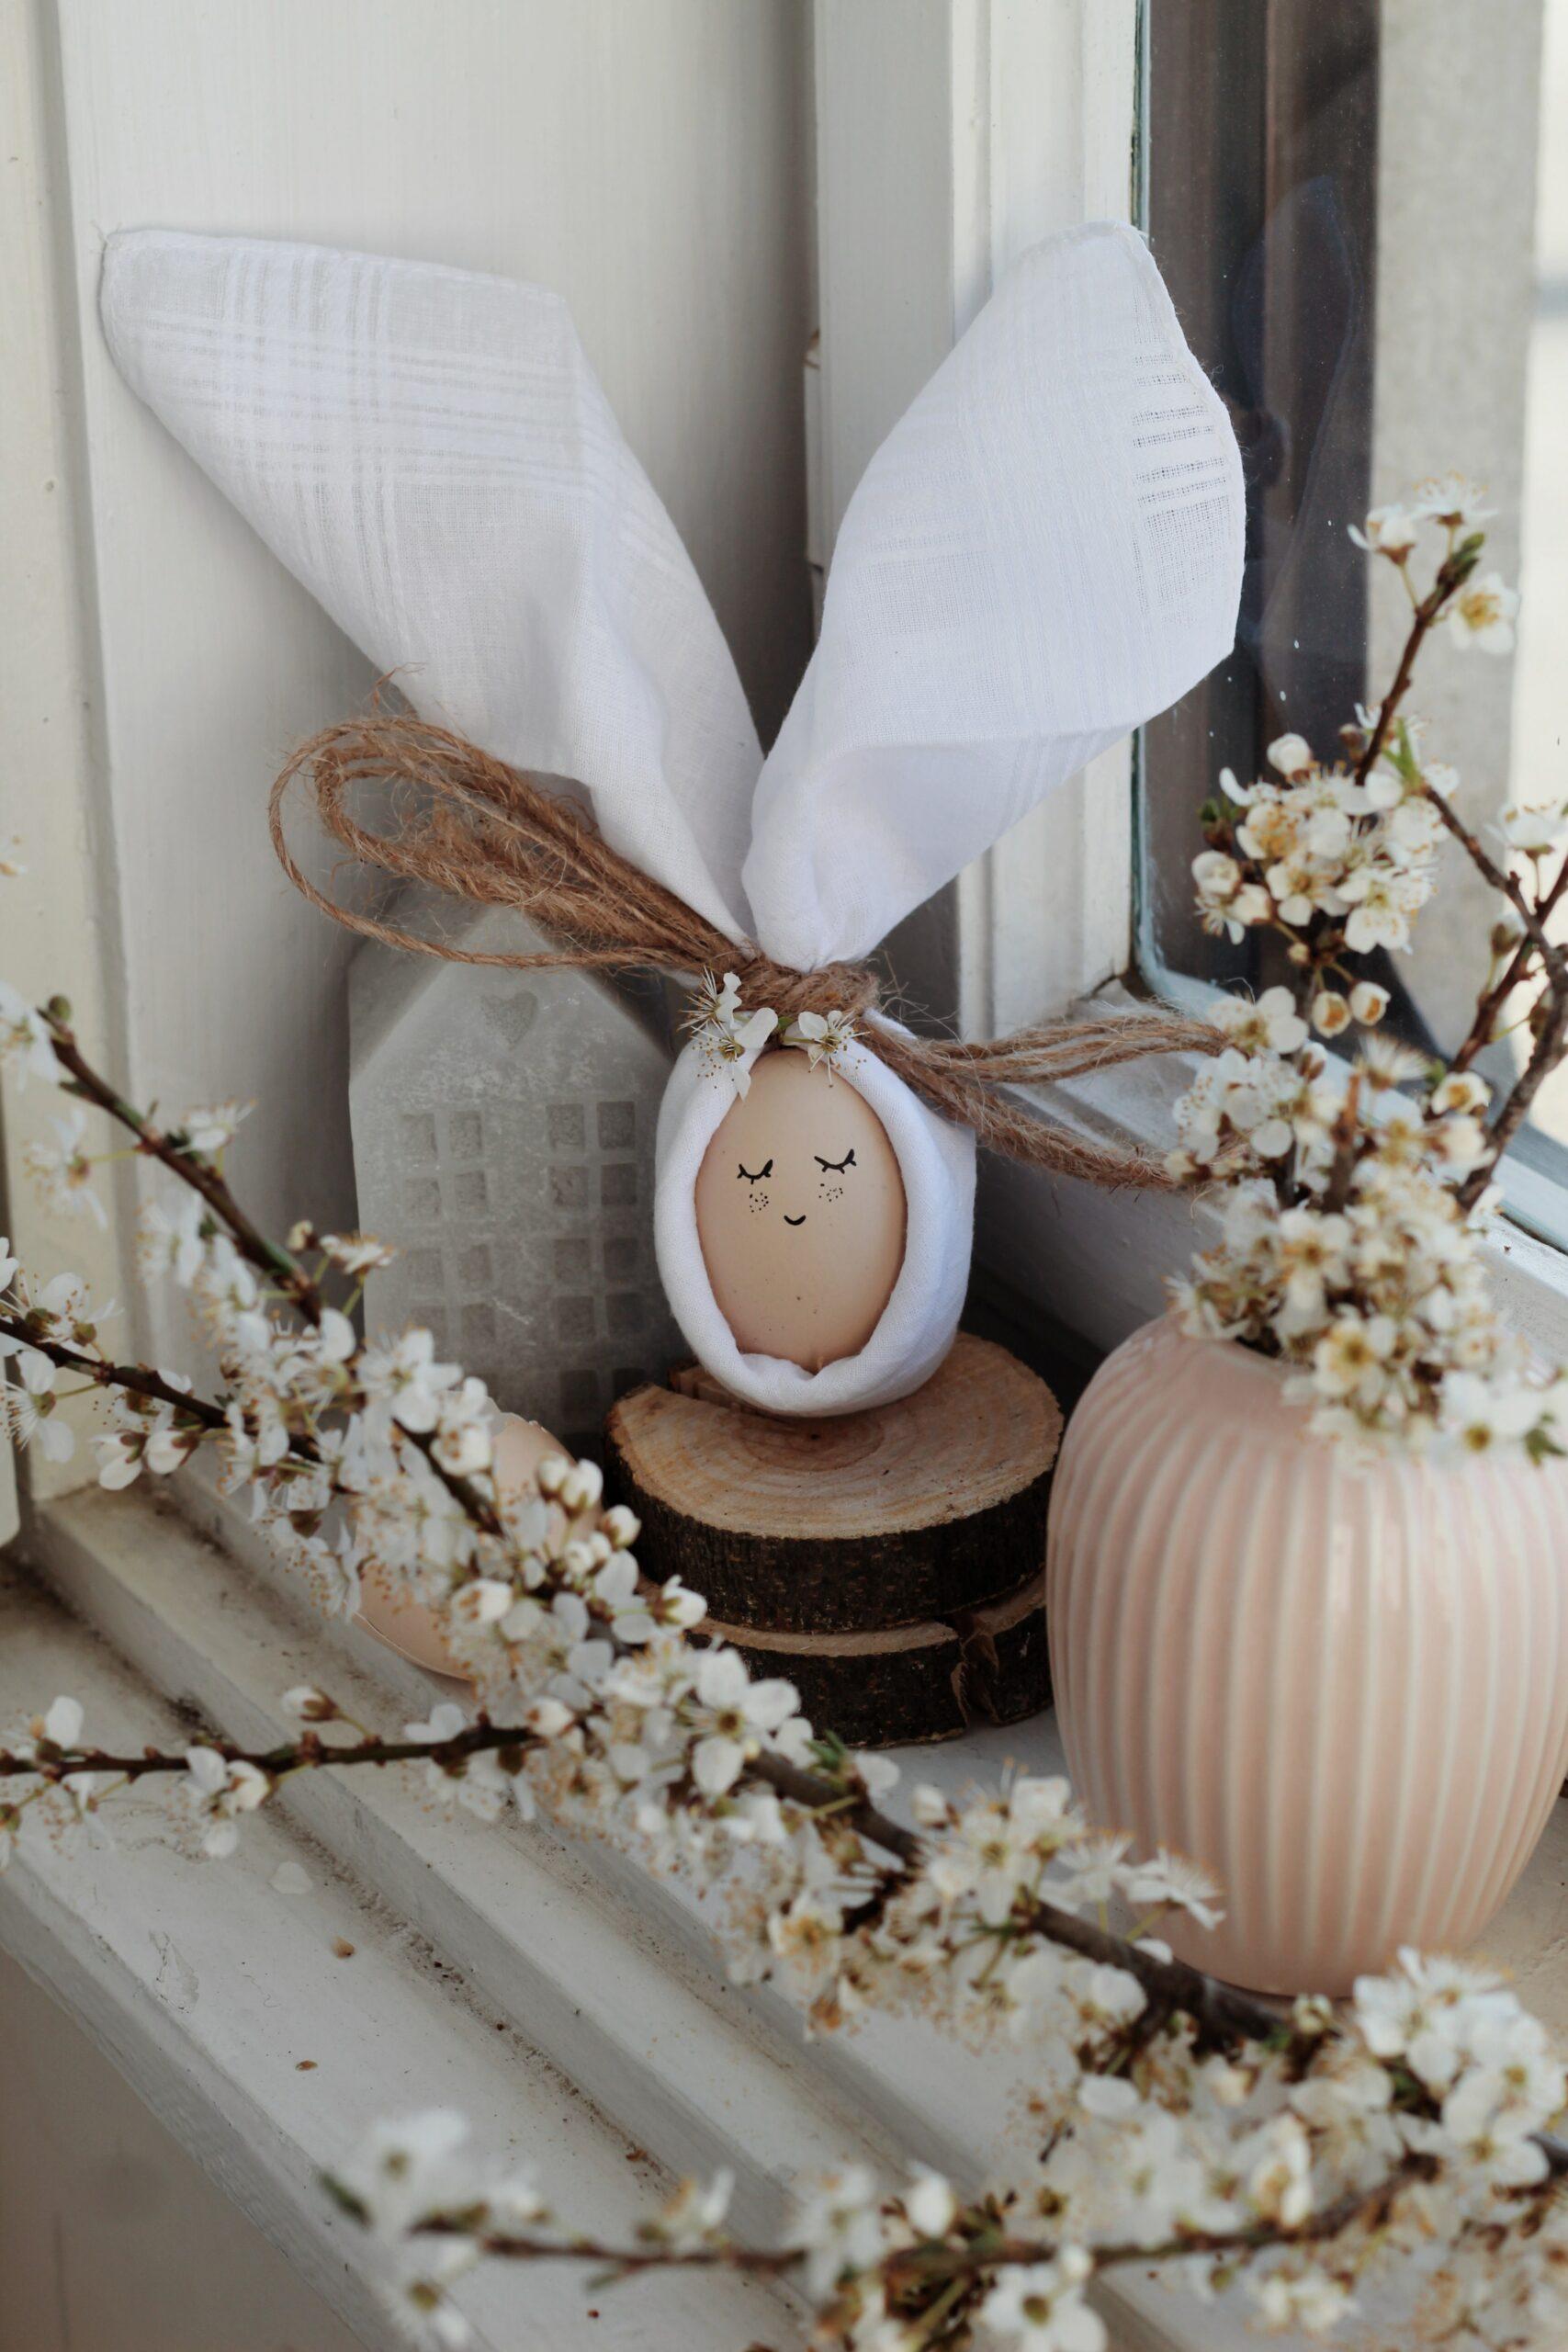 A brown egg with a little face drawn on it. It is wrapped in a white cloth and tied at the top to look like an Easter bunny